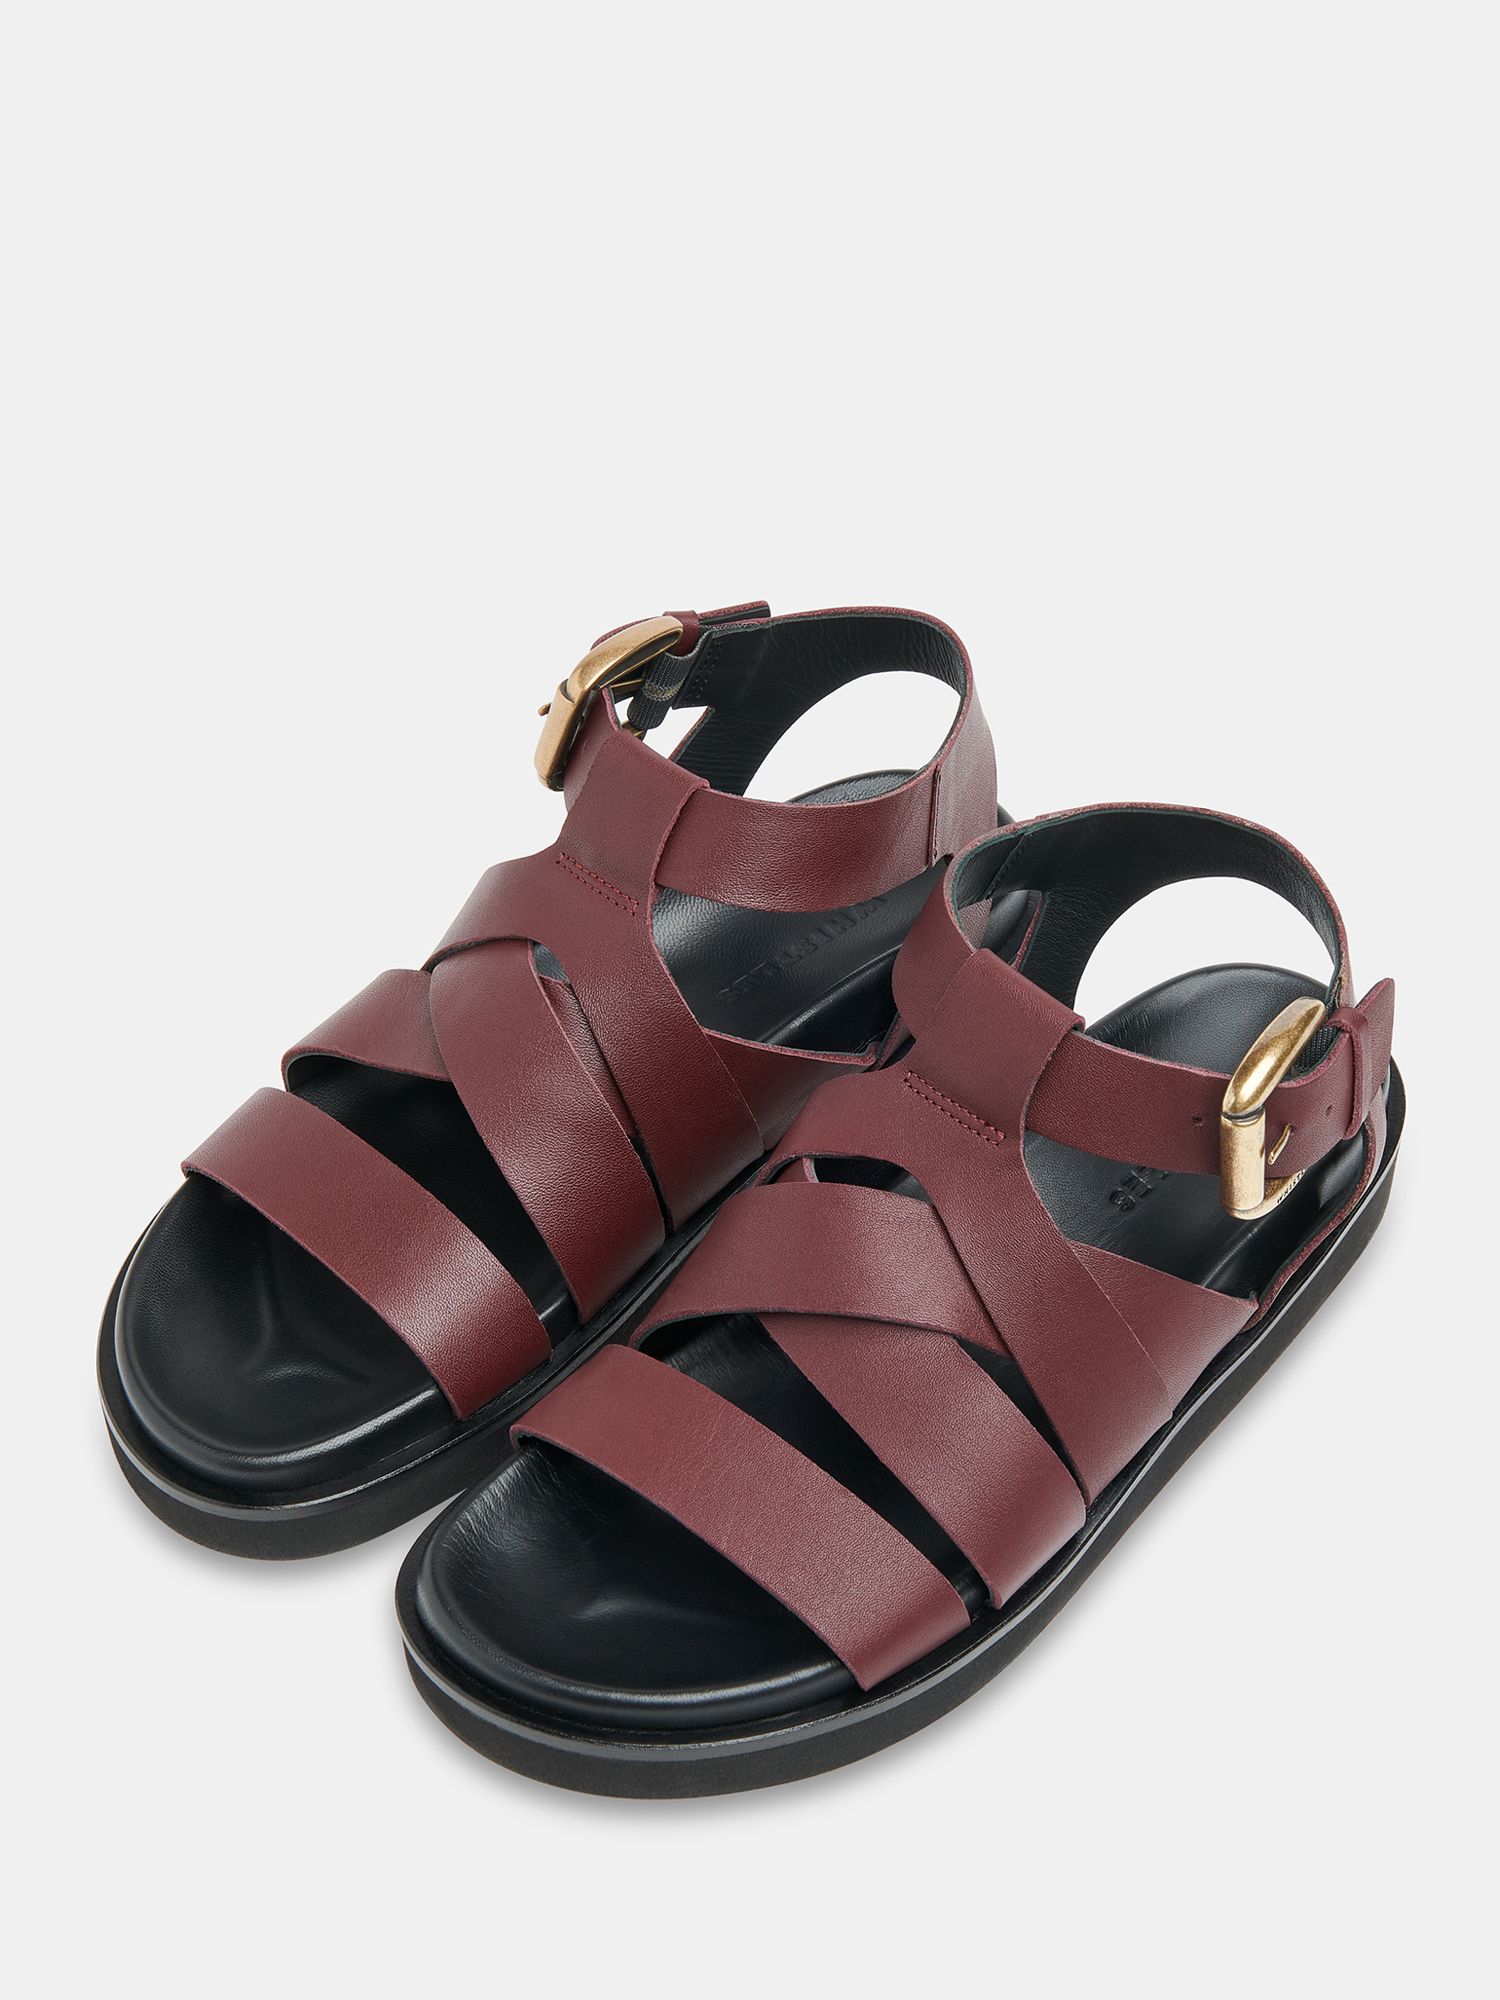 Buy Whistles Ezra Strappy Leather Sandals Online at johnlewis.com